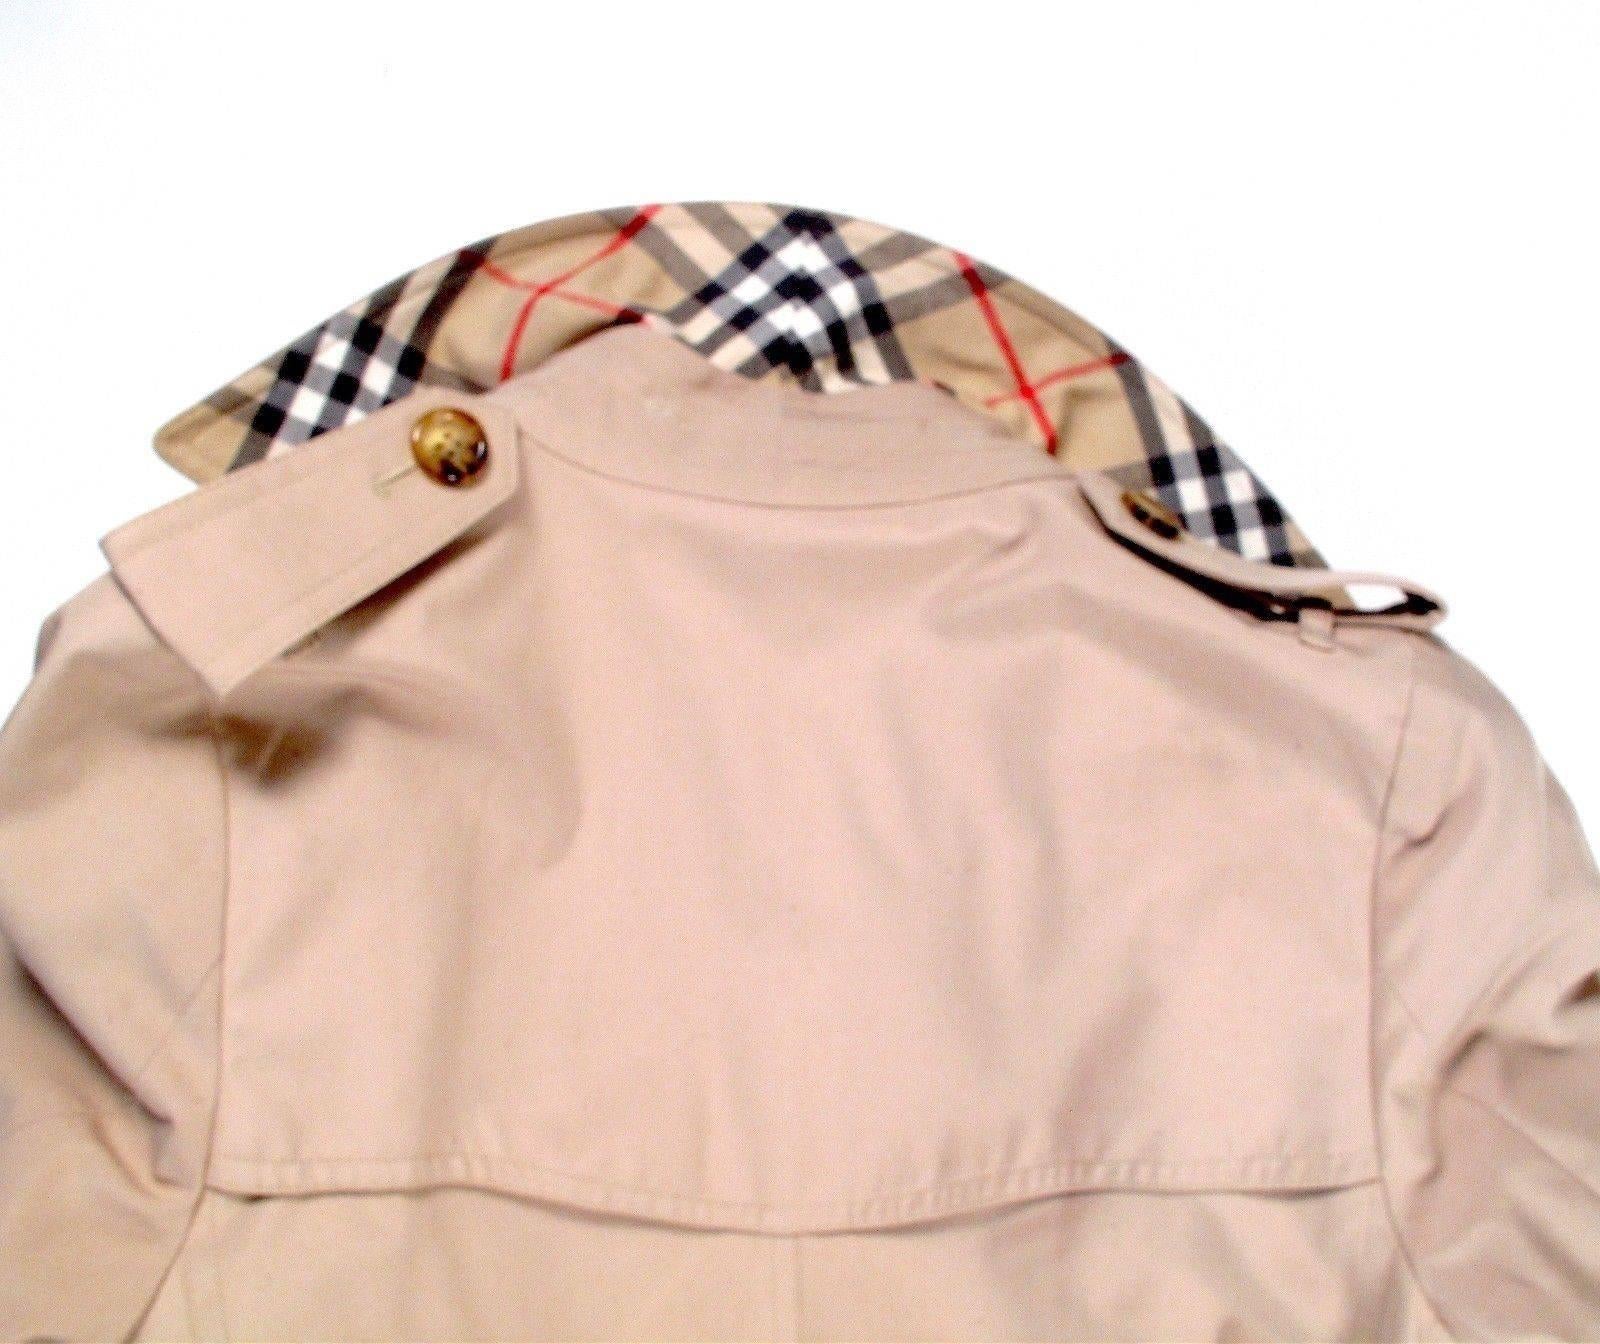 Burberry Trench Coat - 2 / 4 - 34 - 36 - Tan Belted Jacket Cotton London In Excellent Condition In Prahran, Victoria